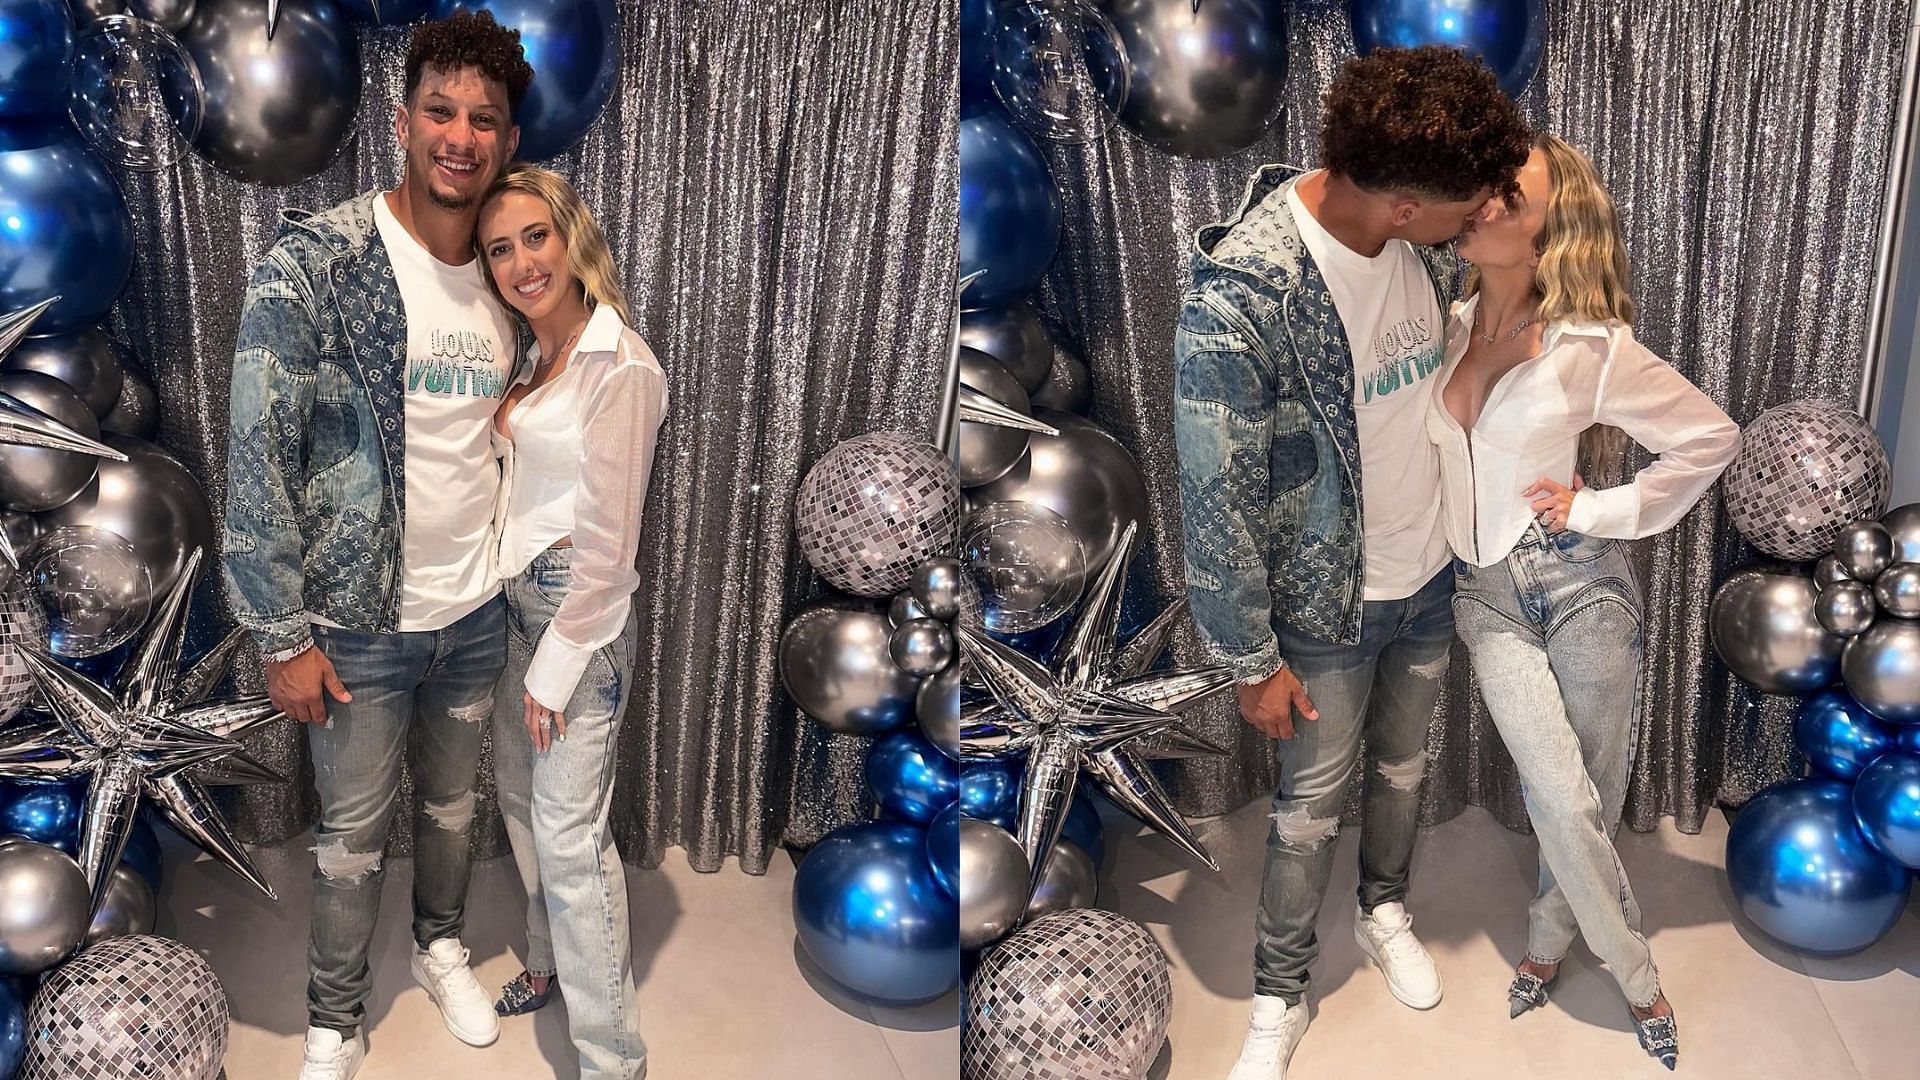 Patrick Mahomes Threw 'The Best' Surprise Party for Wife Brittany